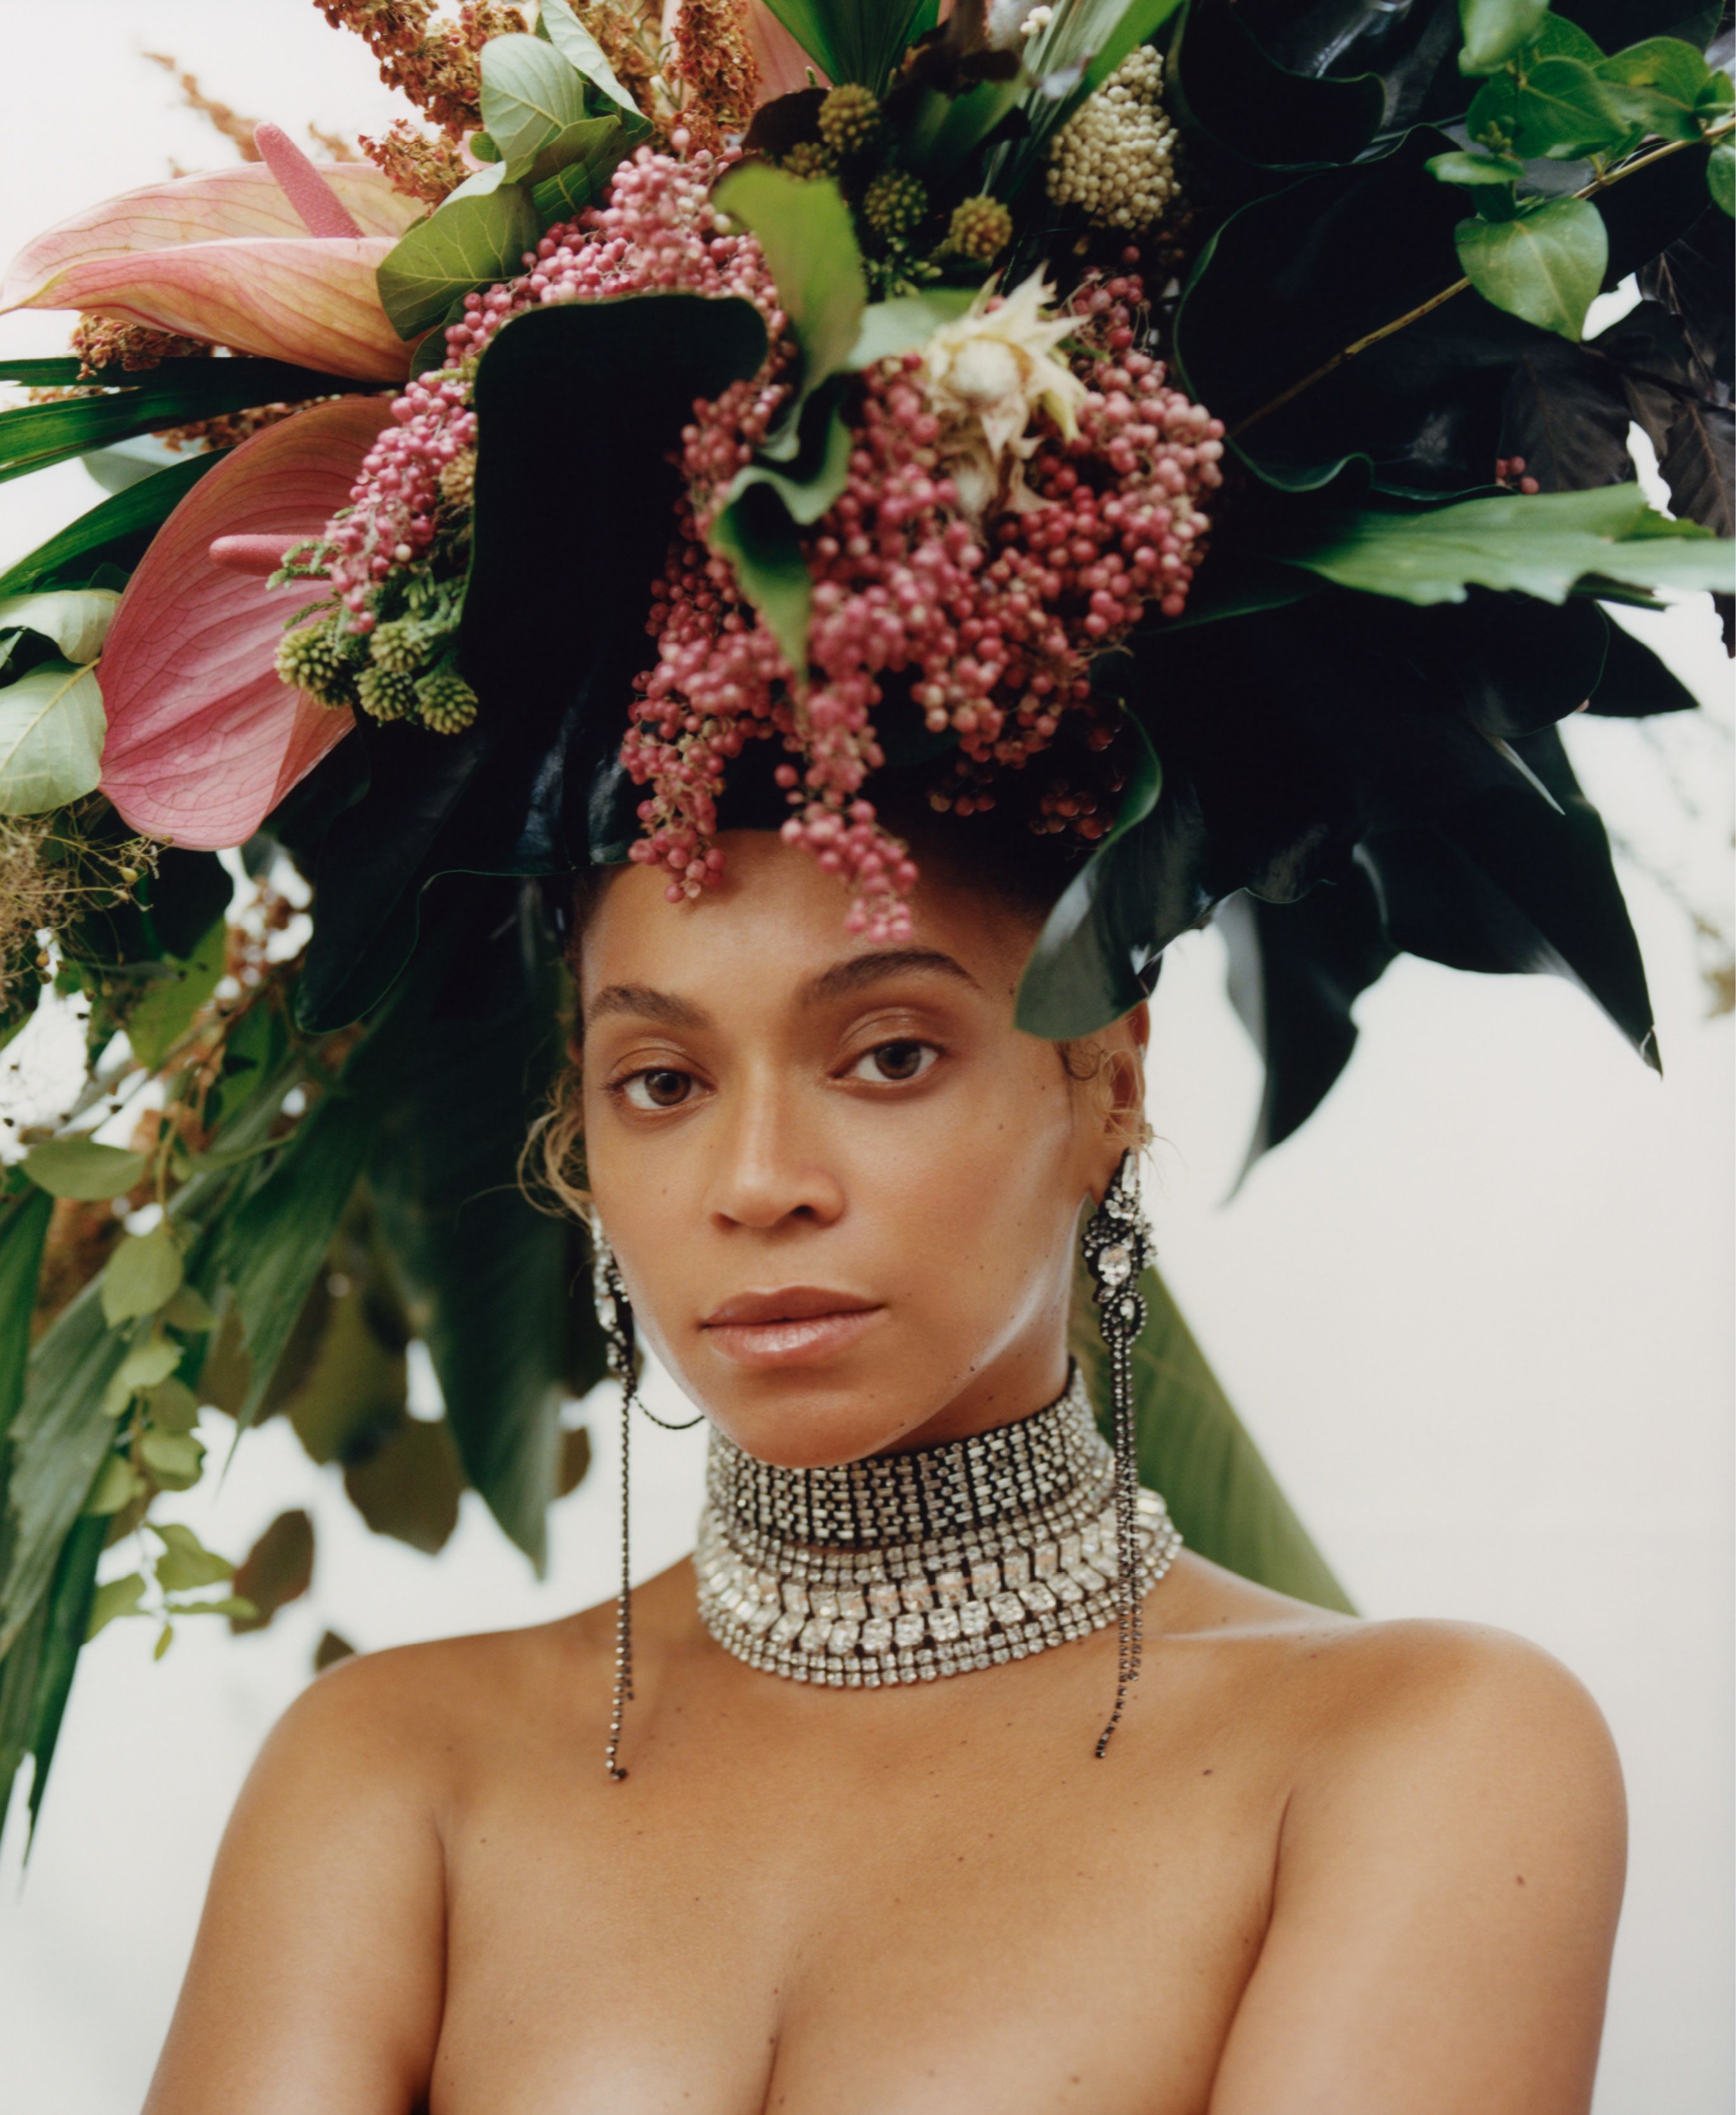 Beyoncé graces American Vogue September issue cover and it's a first